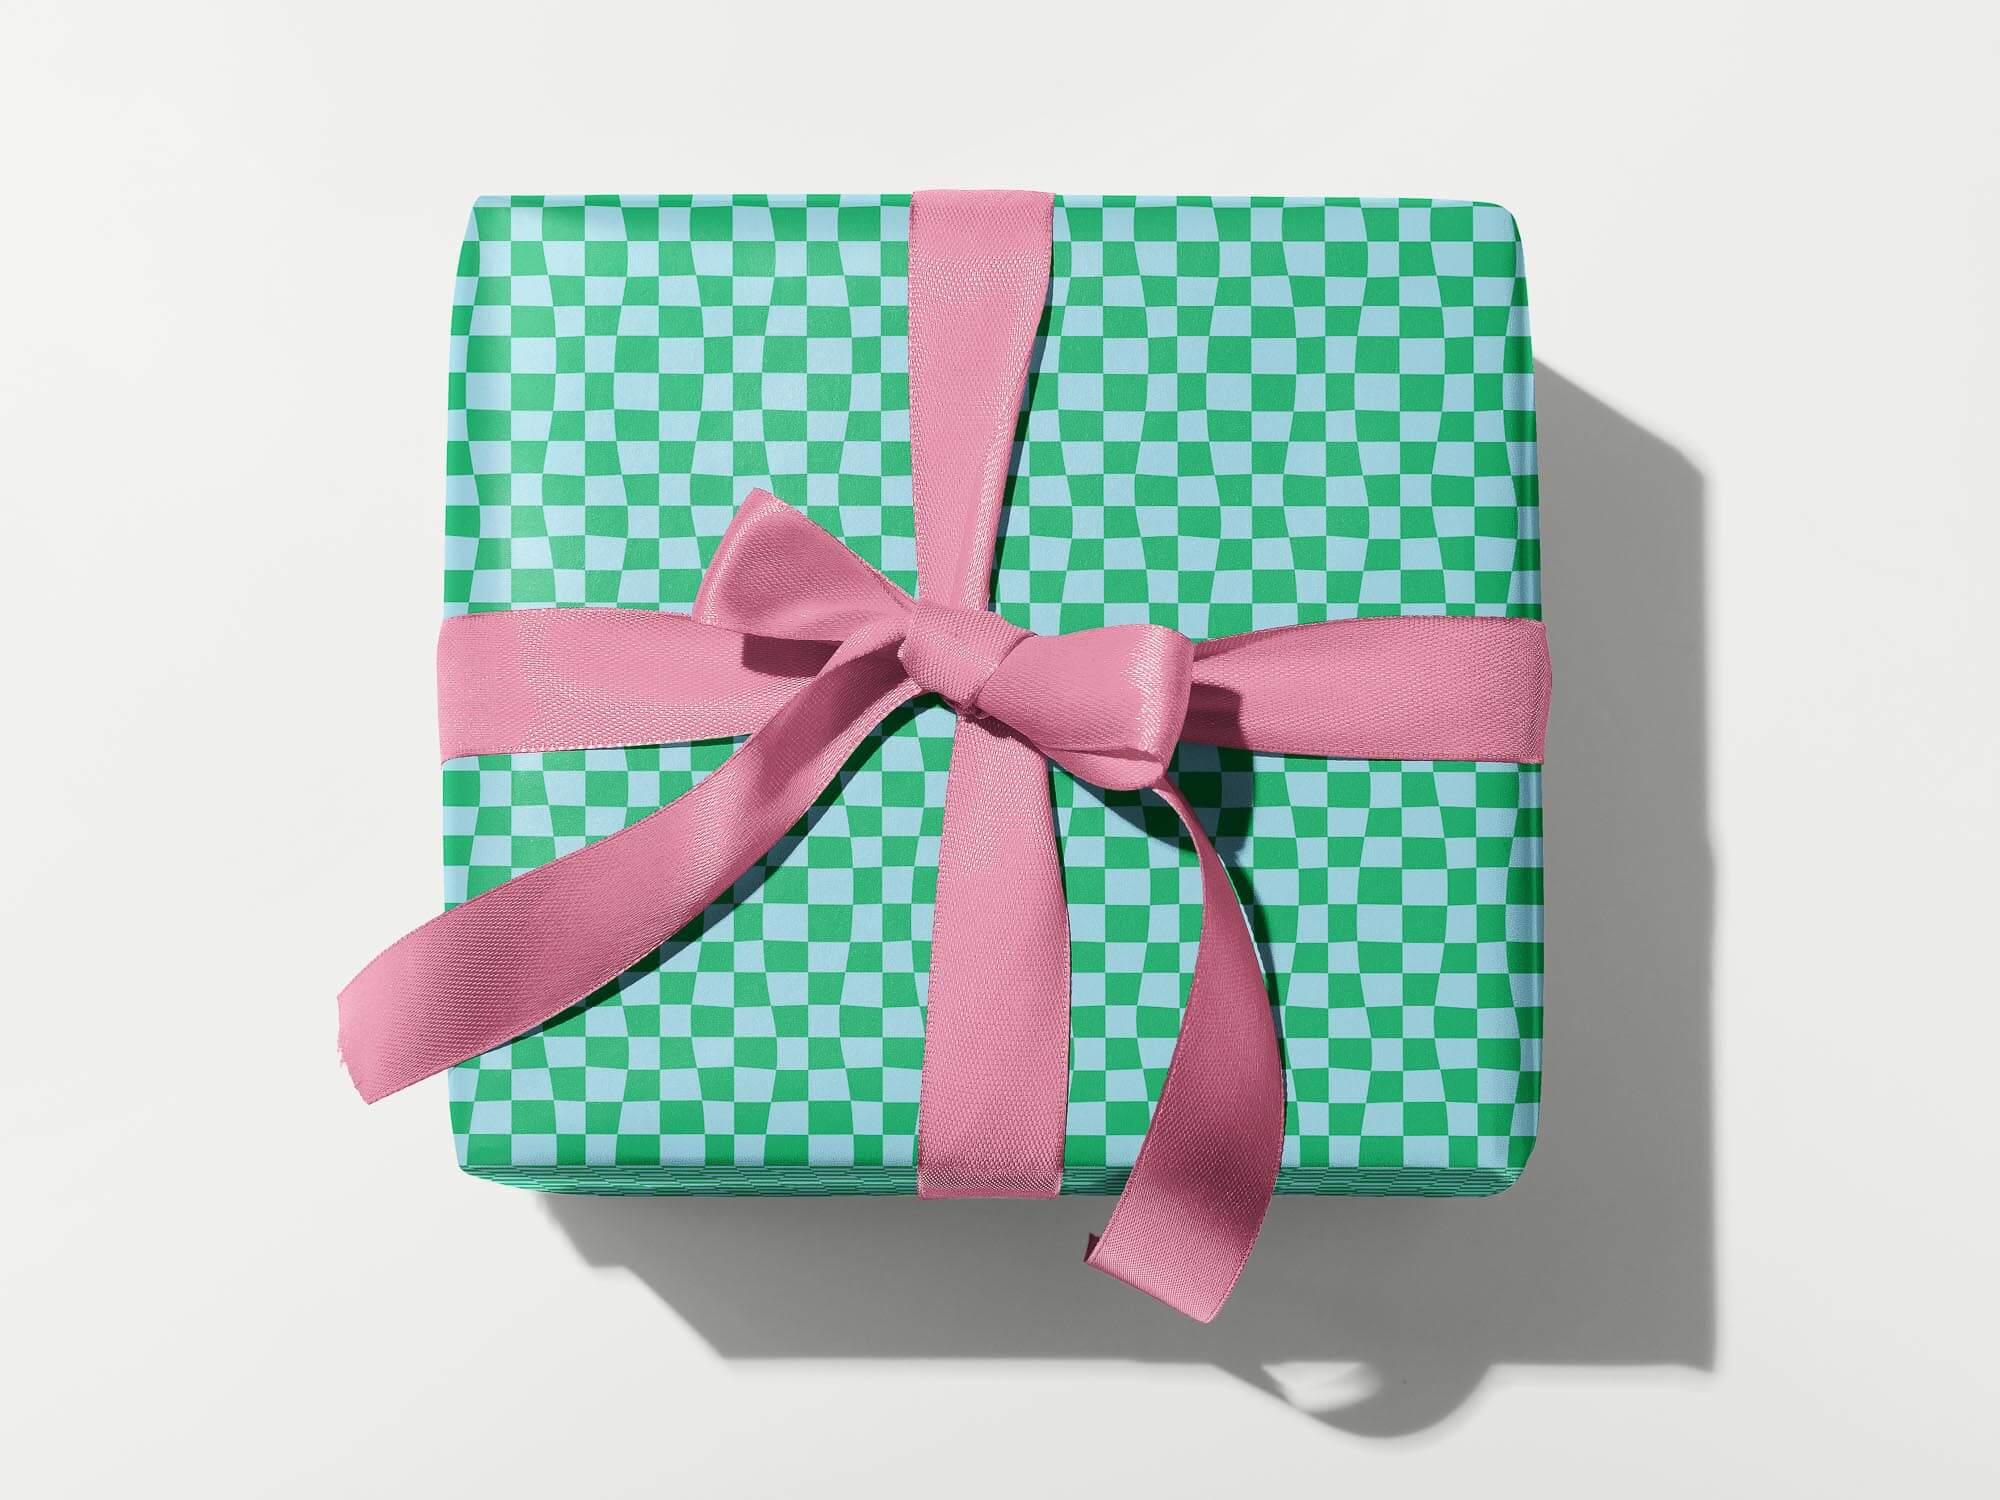 Chunky Checker green and blue wavy checkerboard pattern wrapping paper. Colorful, modern, gift wrapping sheets with fun prints and patterns by @mydarlin_bk. Made in USA.